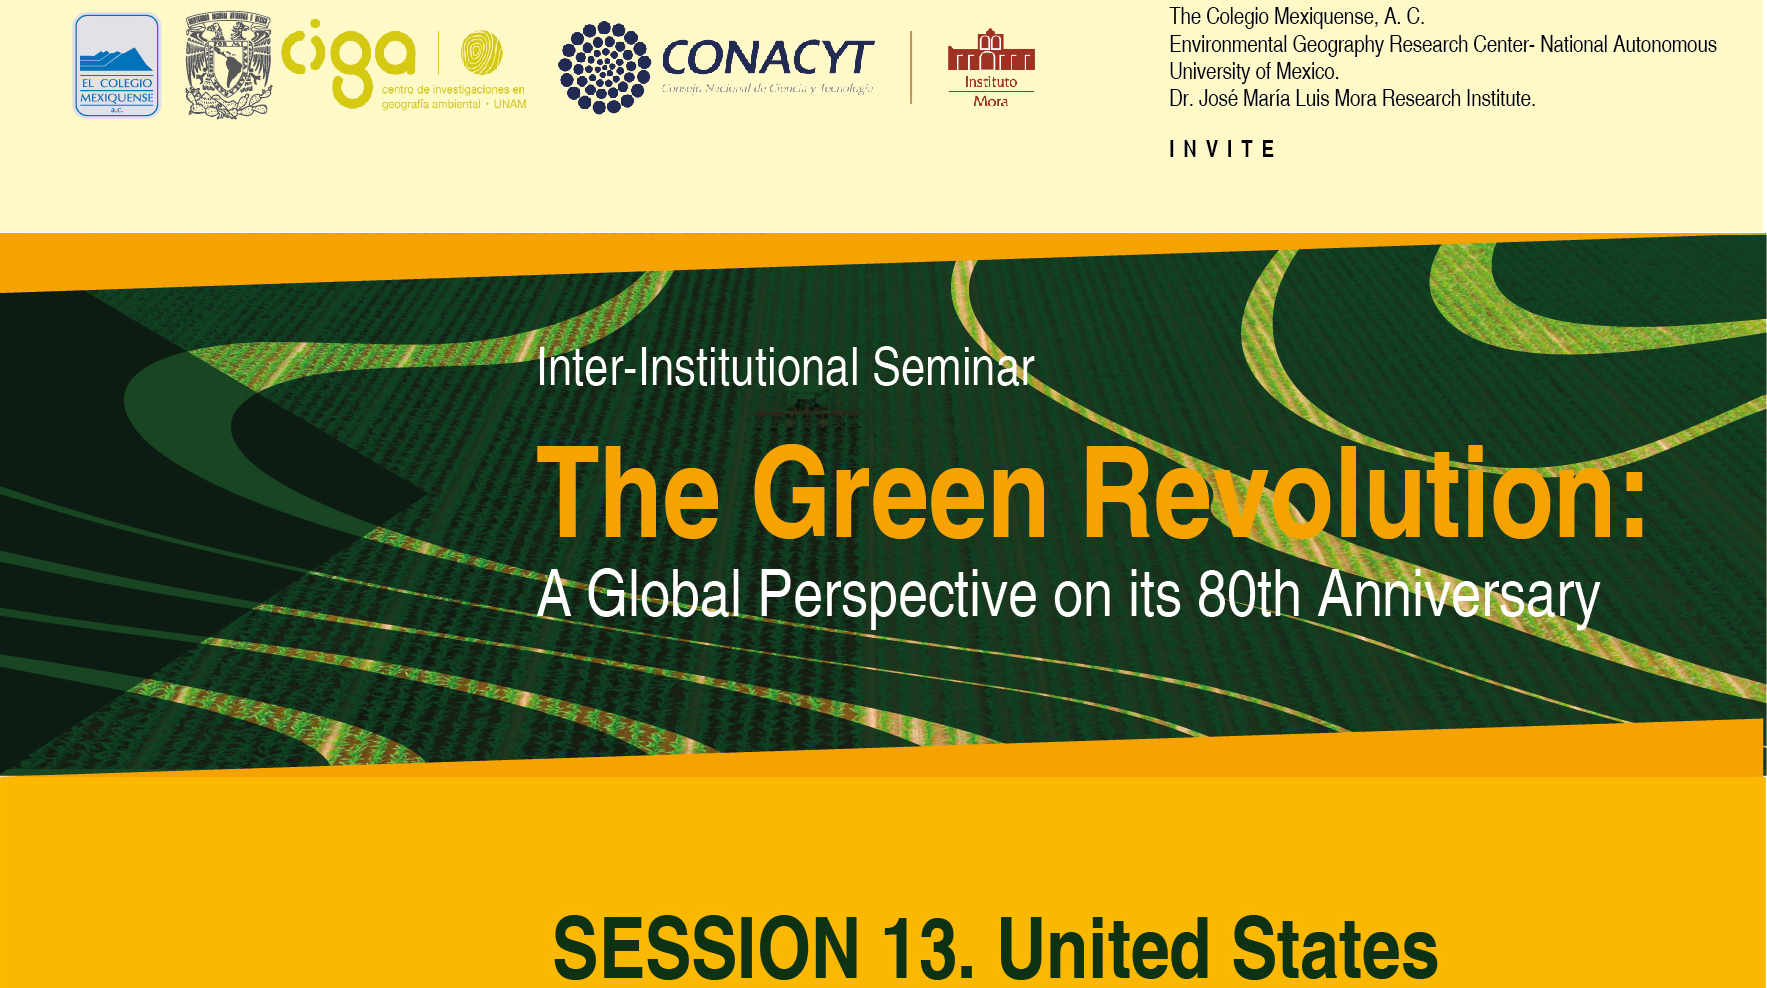 Session 13. United States of America. The Green Revolution: A Global Perspective on its 80th Anniversary